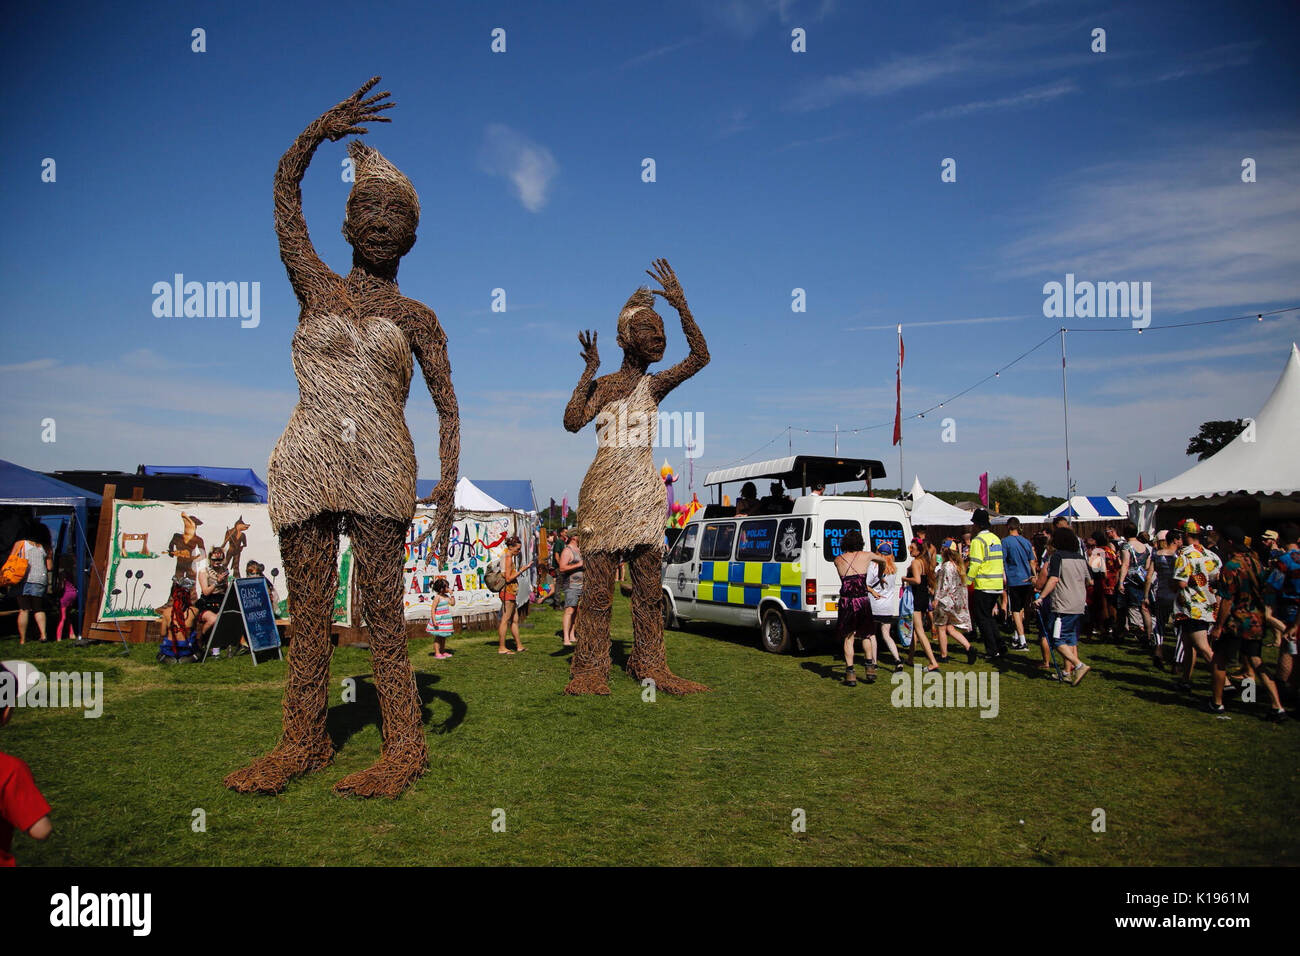 Northampton, UK. 25th August, 2017. A festival goer practices paddleboard yoga. The alternative festival famed for authentic music, crazy fancy dress and enthusiastic energy continues today under sunny skies on the Kelmarsh Estate. Credit: Wayne Farrell/Alamy Live News Stock Photo